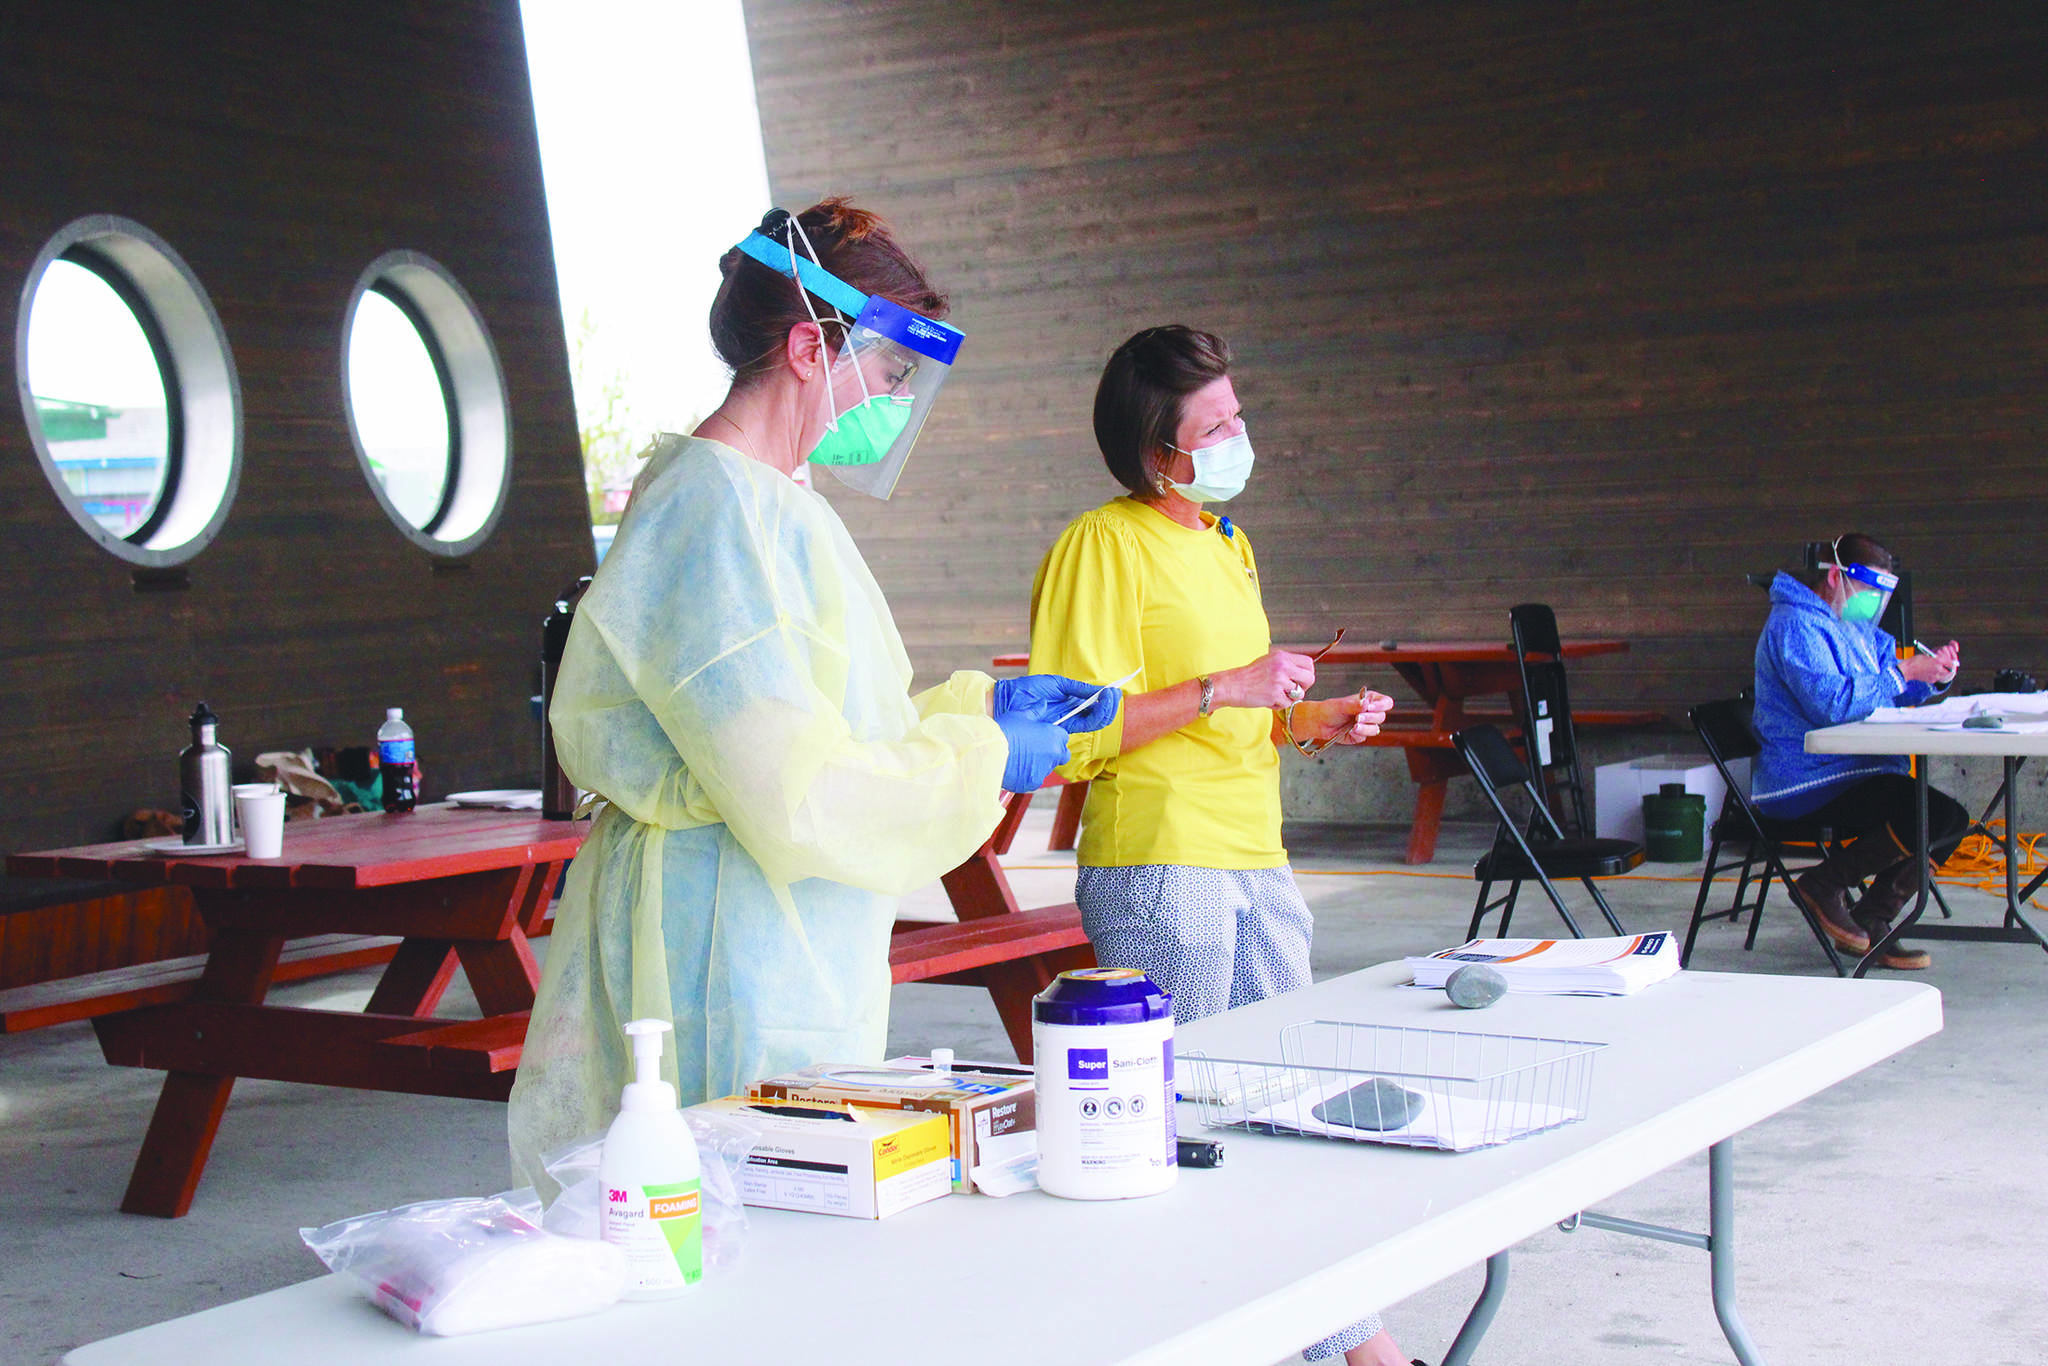 Registered Nurse Cathy Davis (left) and Chief Nursing Officer Dawn Johnson (right) work at a table to get COVID-19 tests ready for the public Friday, May 29, 2020 at the Boat House Pavilion on the Homer Spit in Homer, Alaska. (Photo by Megan Pacer/Homer News)